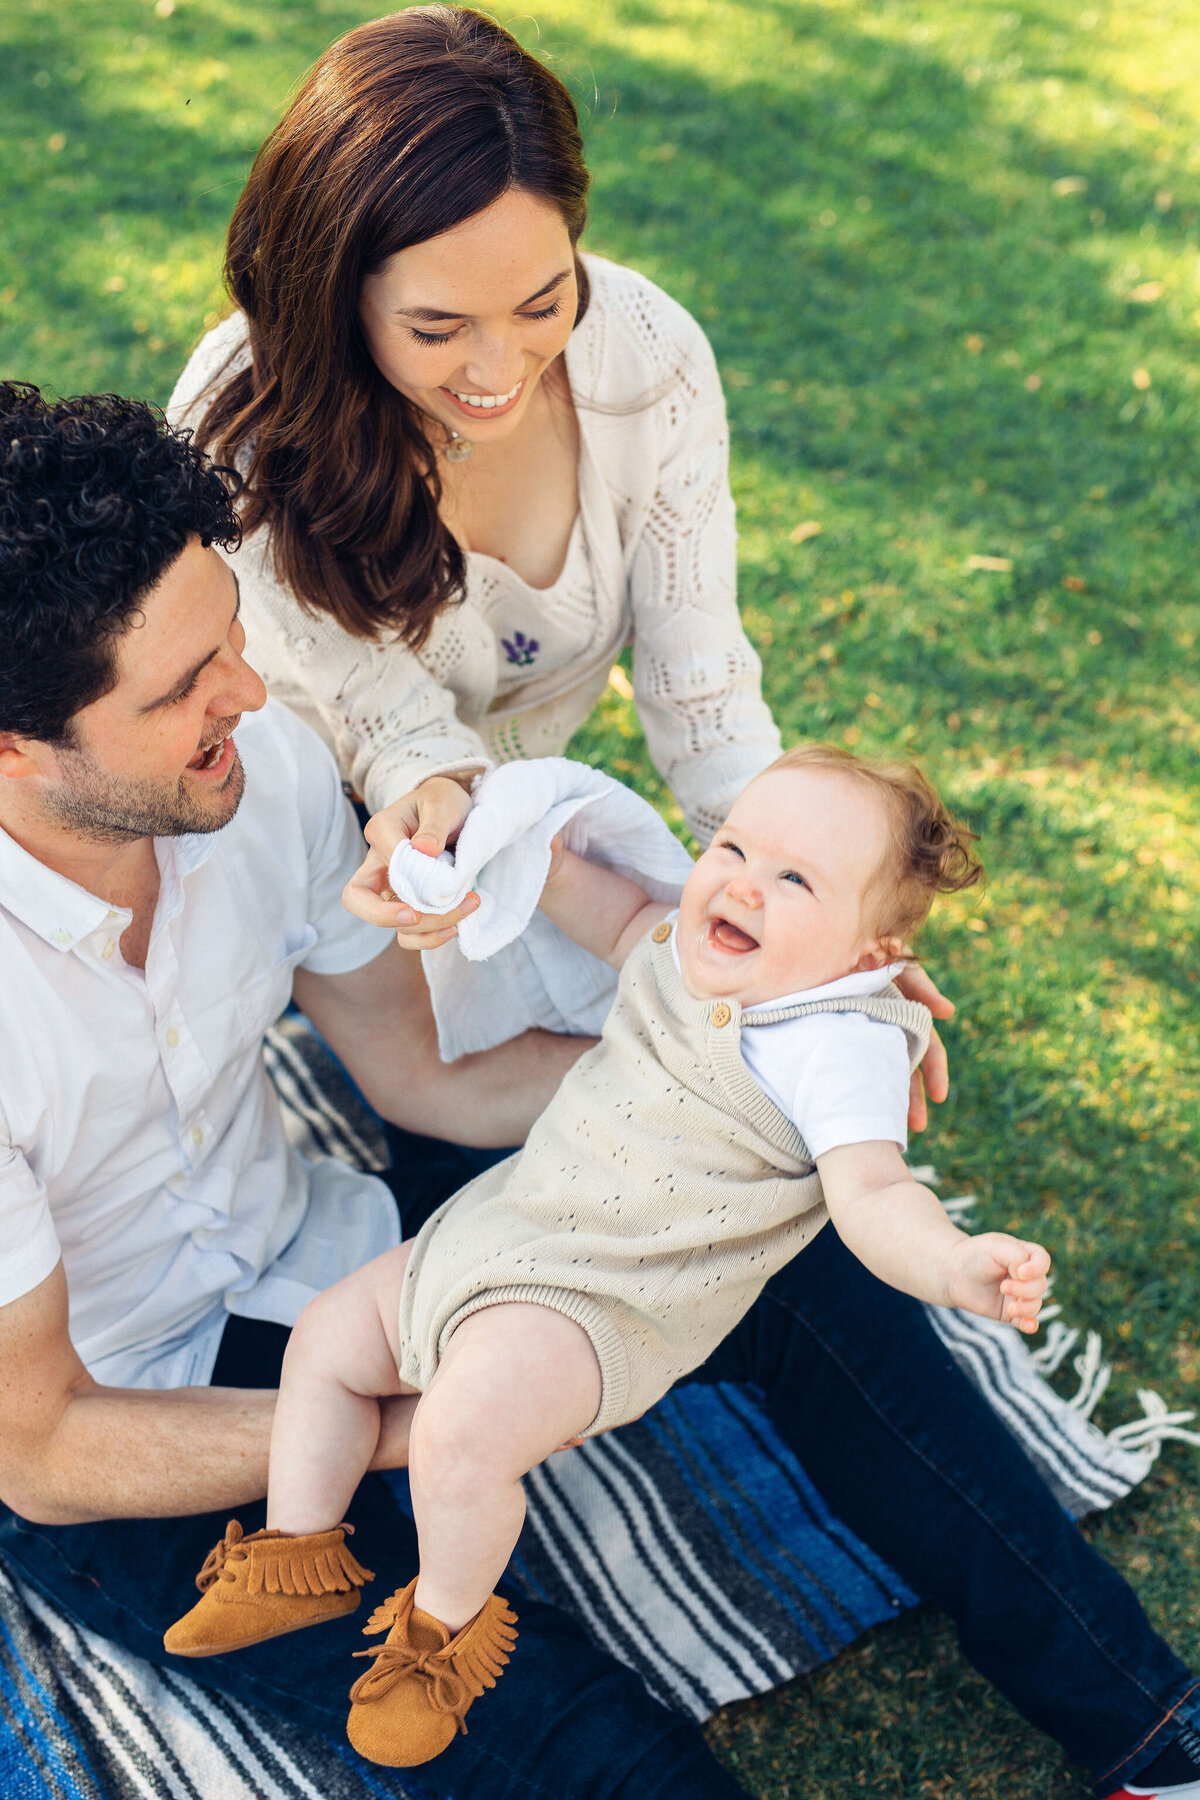 Family Portrait Photo Of Couple Playing With Their baby While Sitting On The Ground In Los Angeles